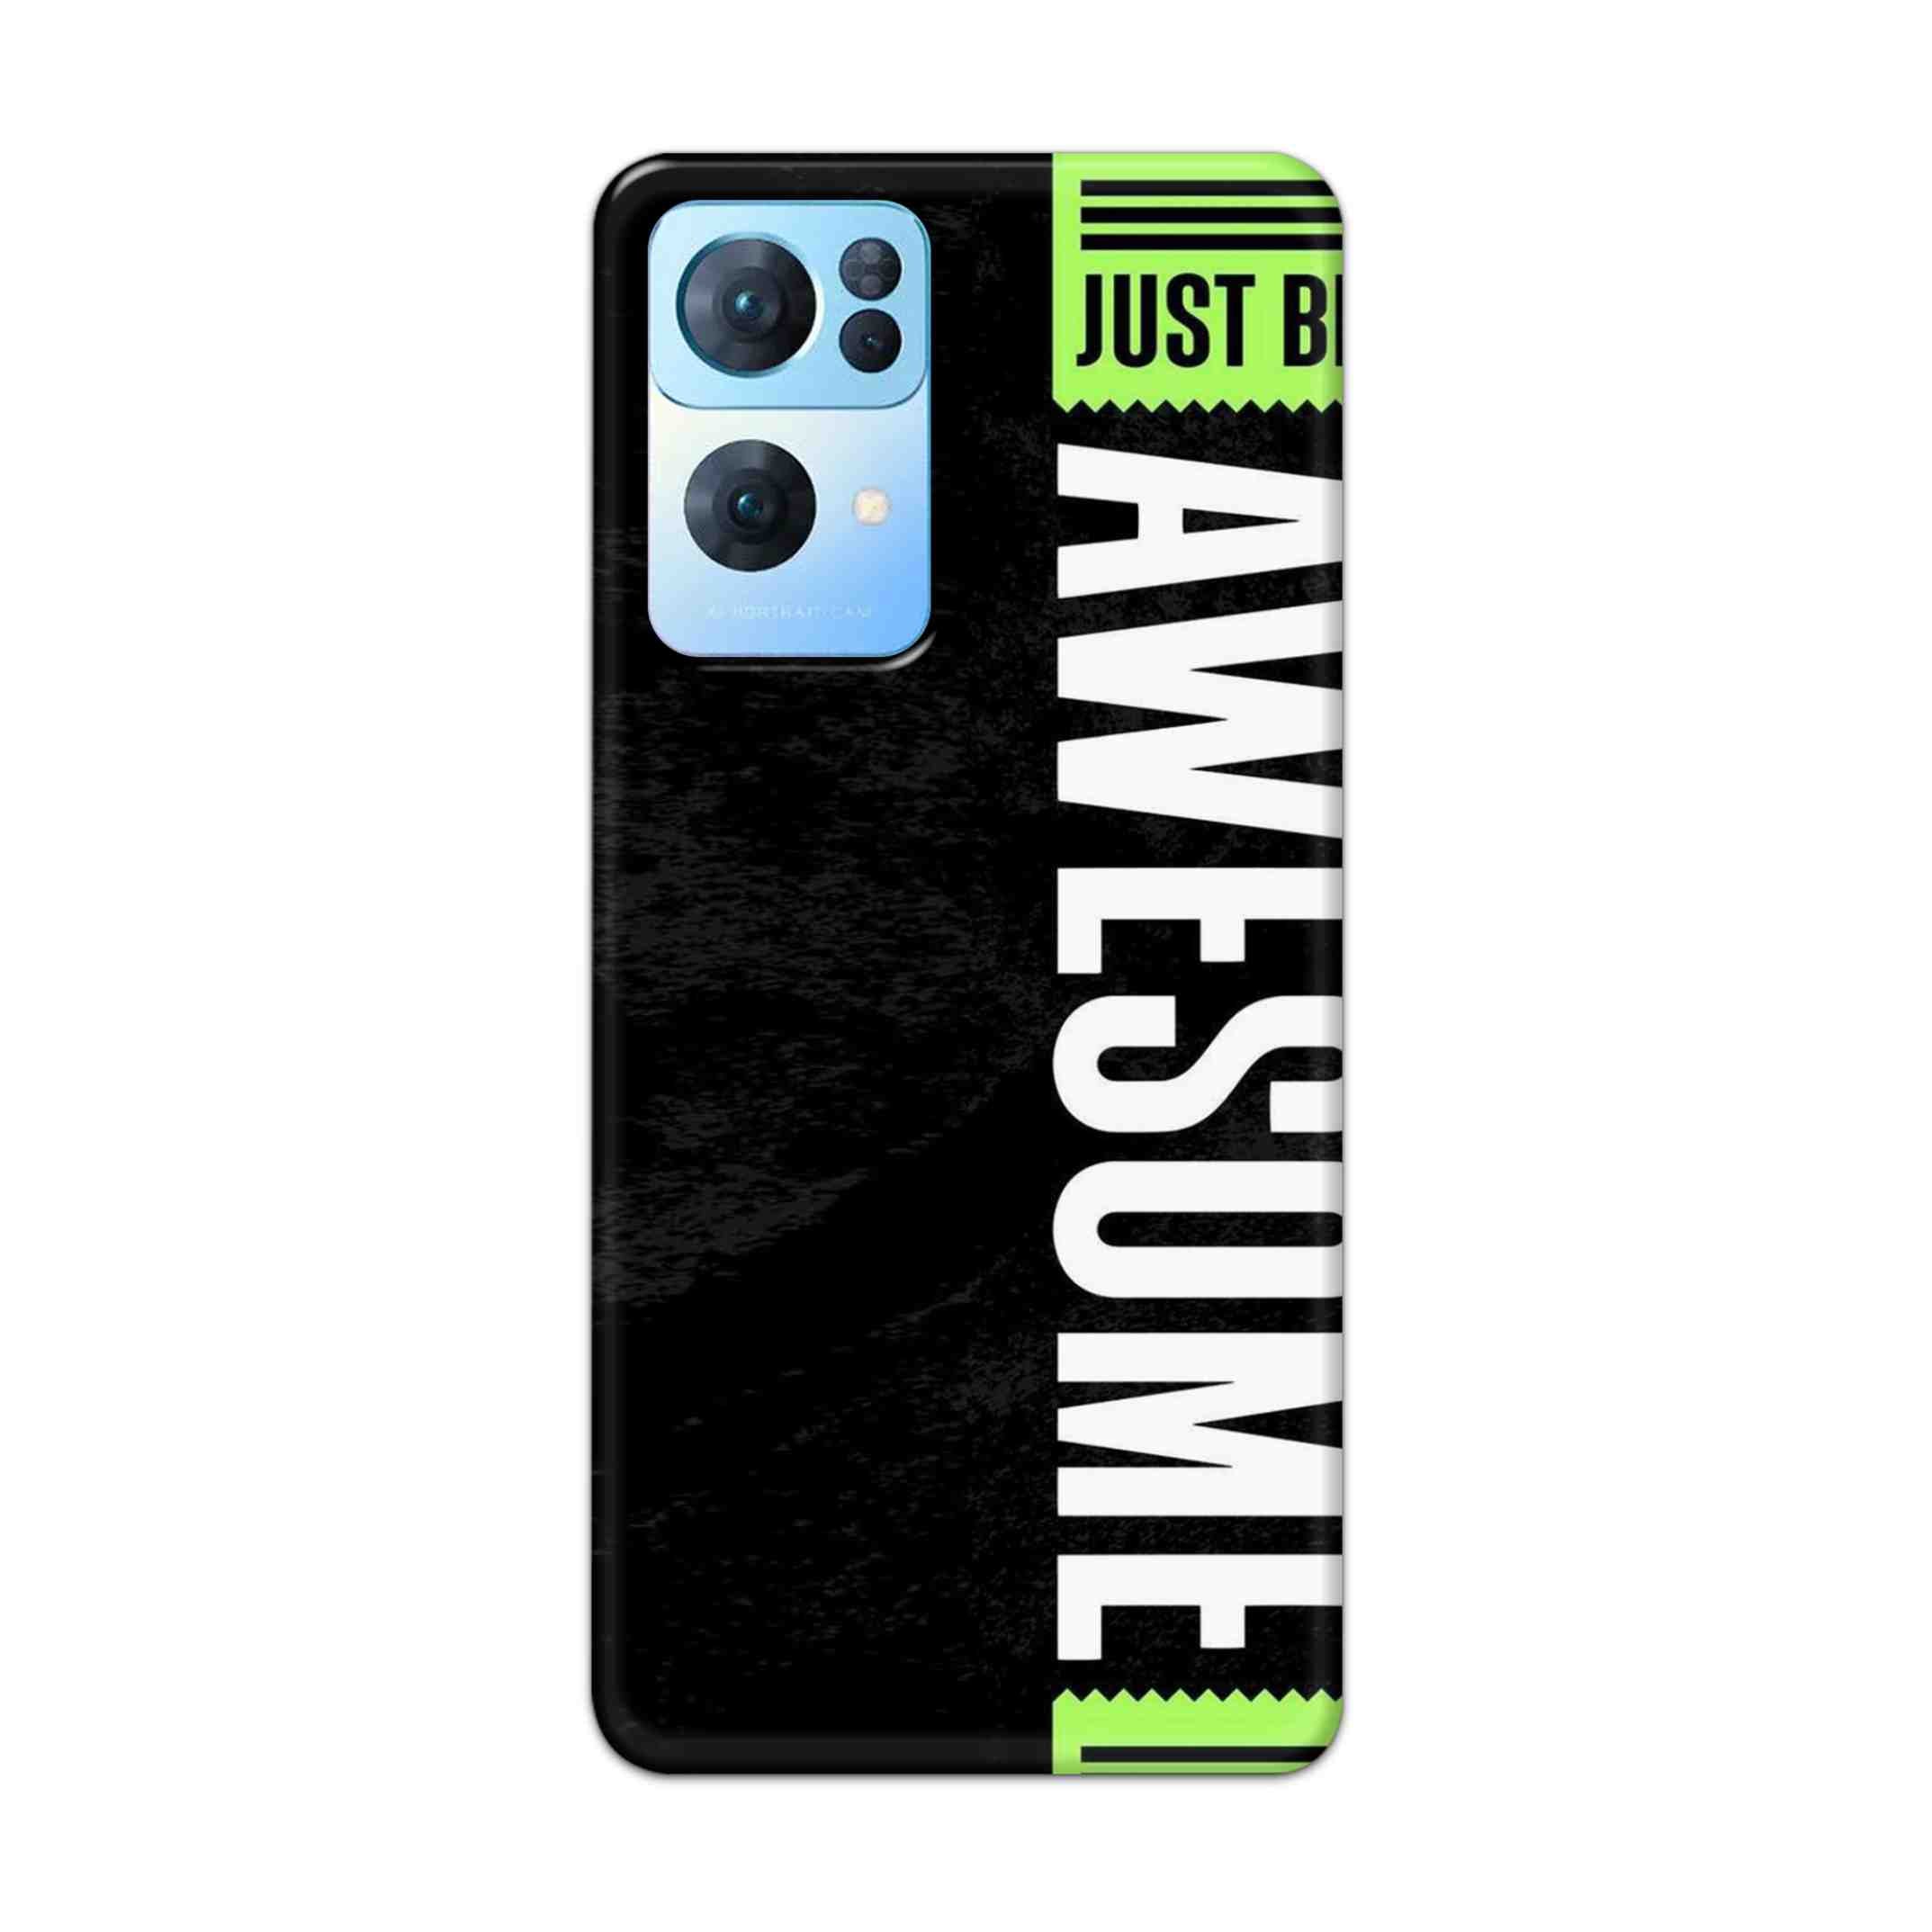 Buy Awesome Street Hard Back Mobile Phone Case Cover For Oppo Reno 7 Pro Online